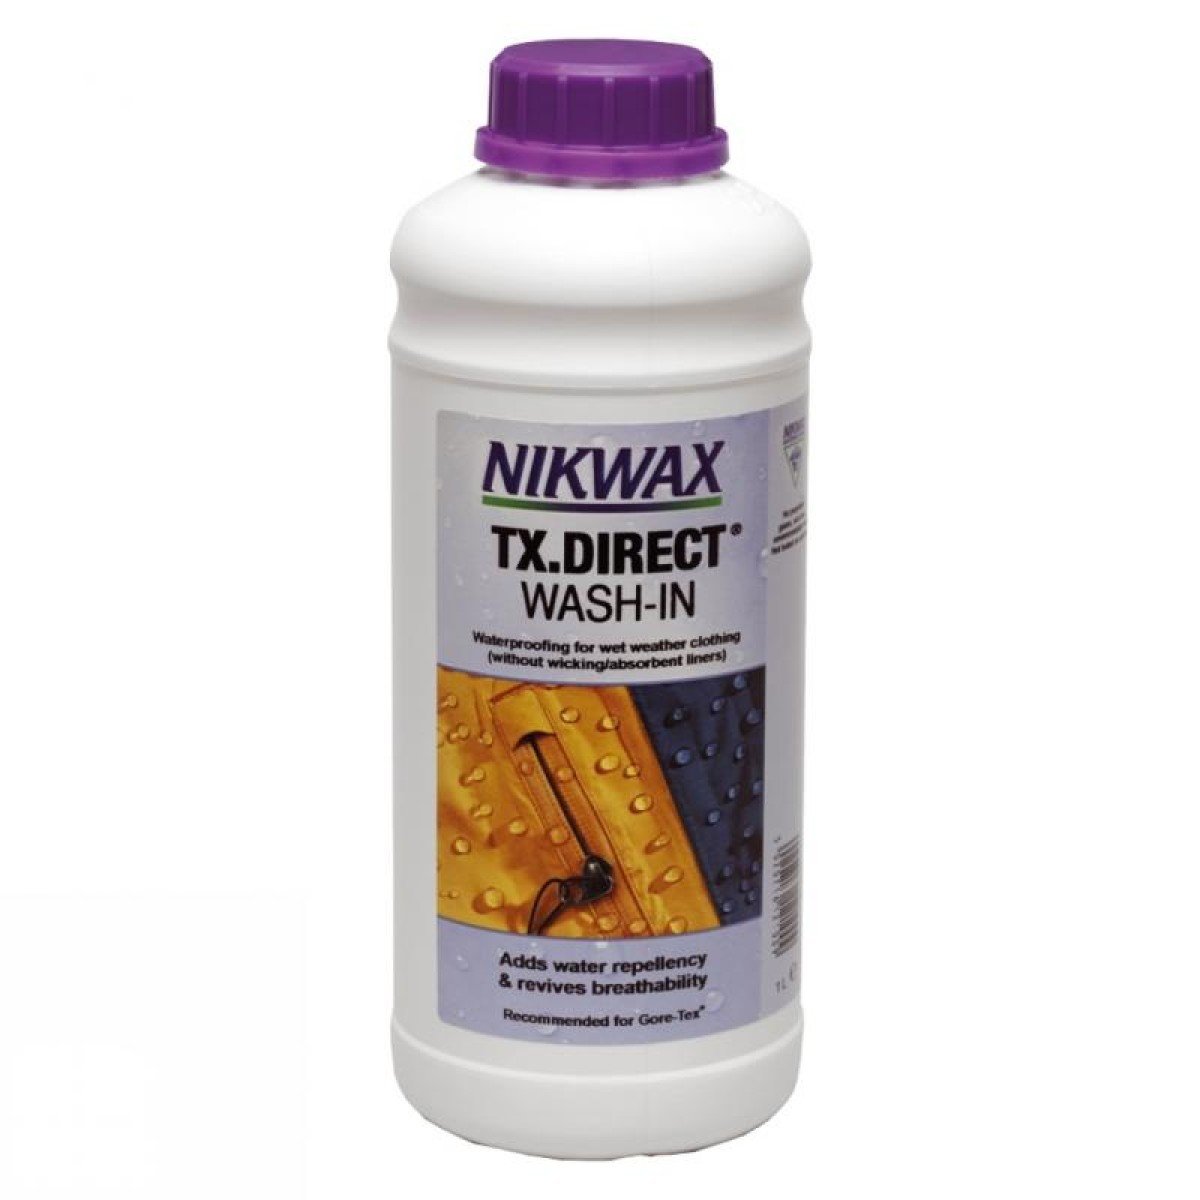 Detegredent for impregnating membranes TX Direct 1l Wash-in NIKWAX - view 1